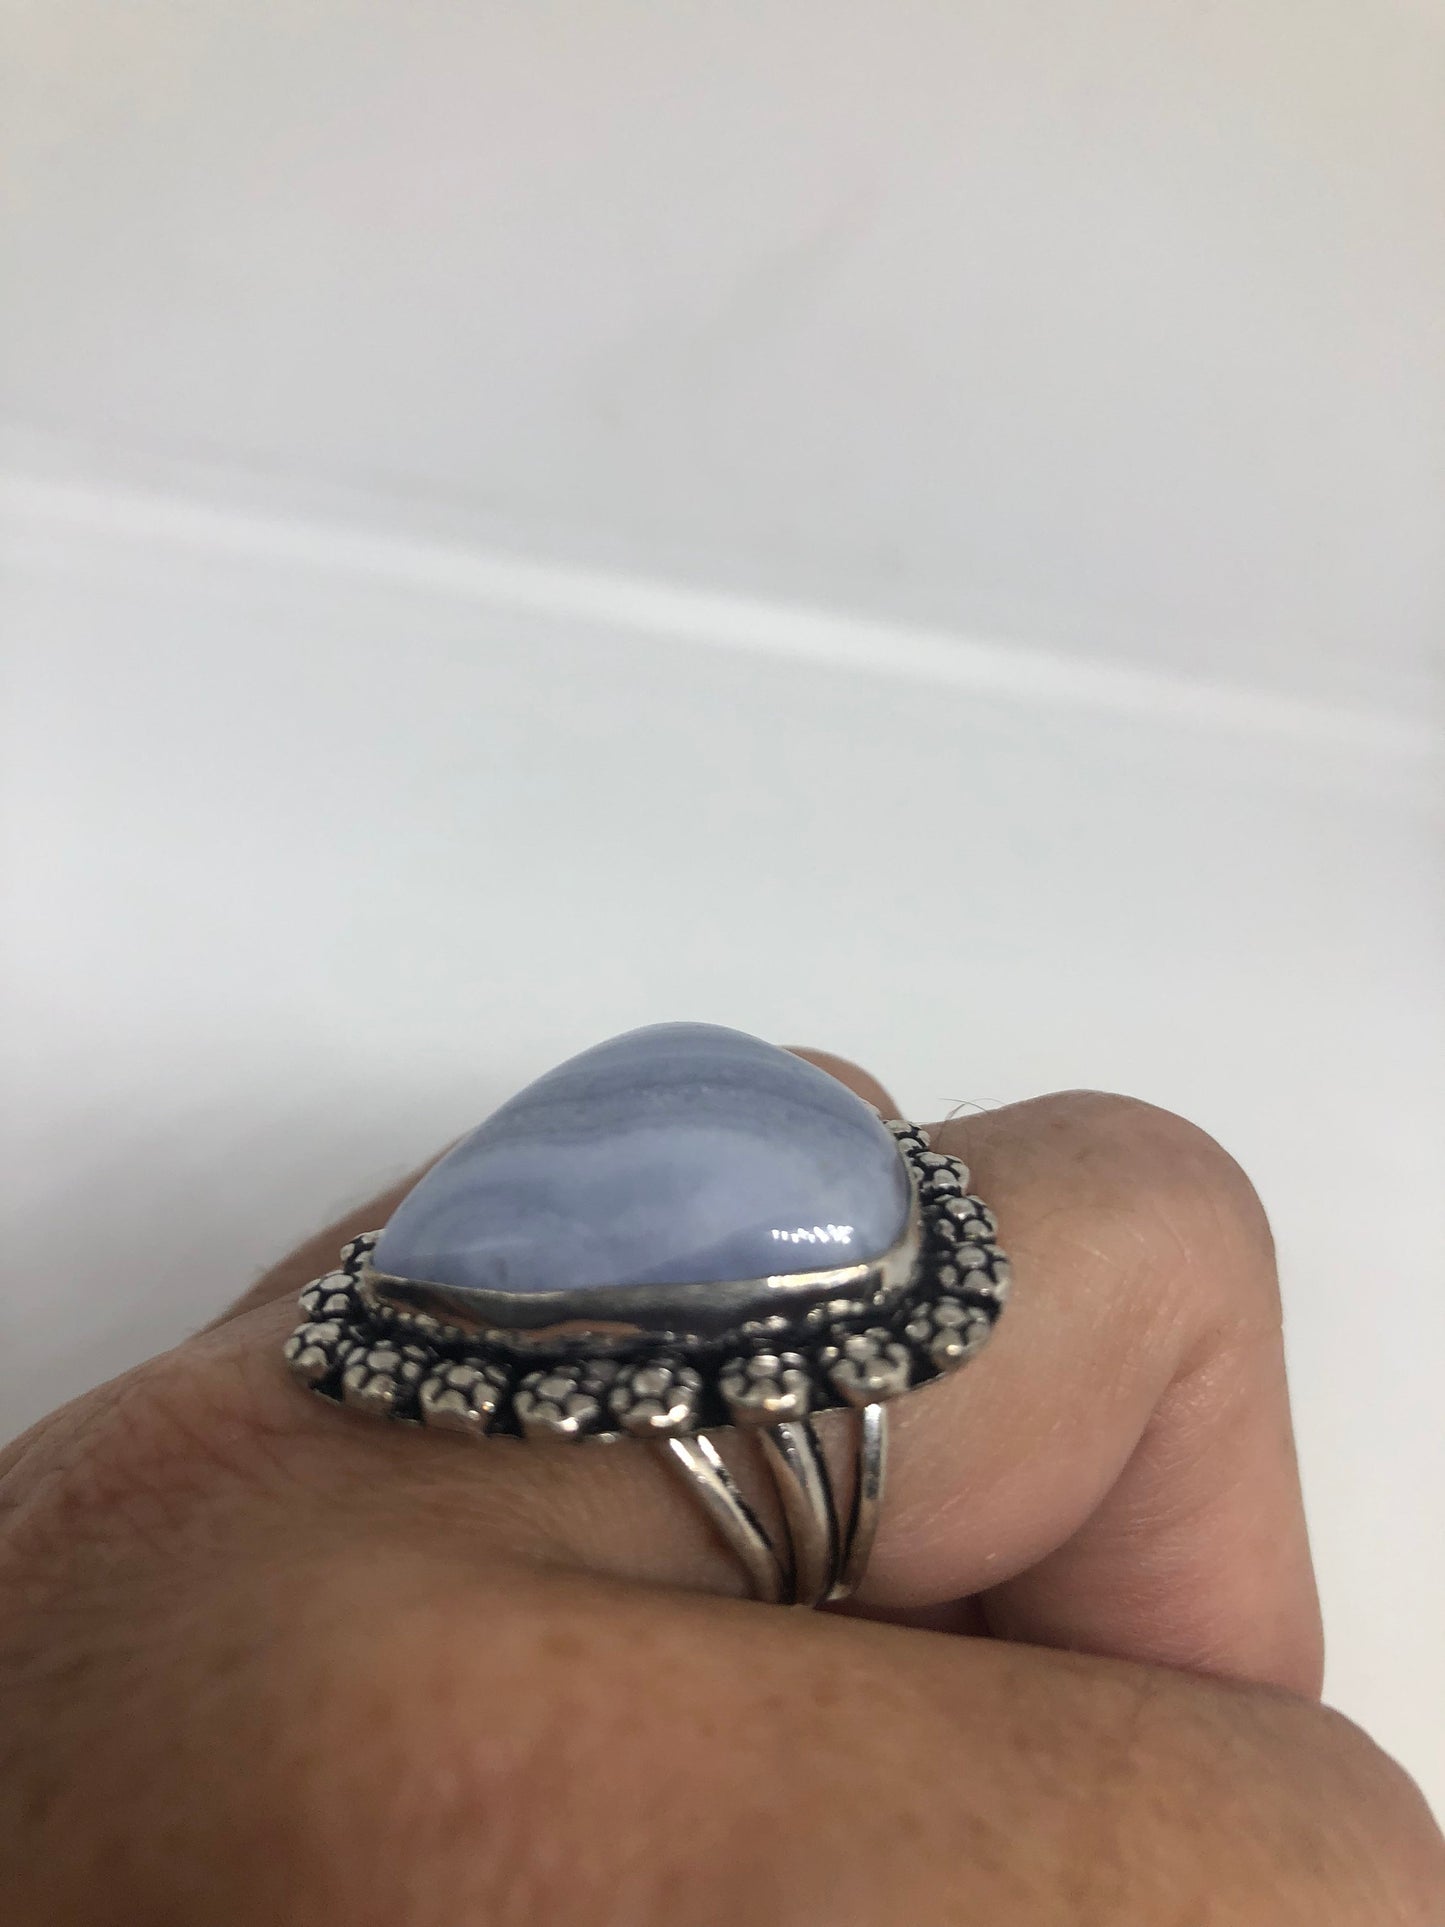 Vintage Genuine Blue Lace agate Silver Ring